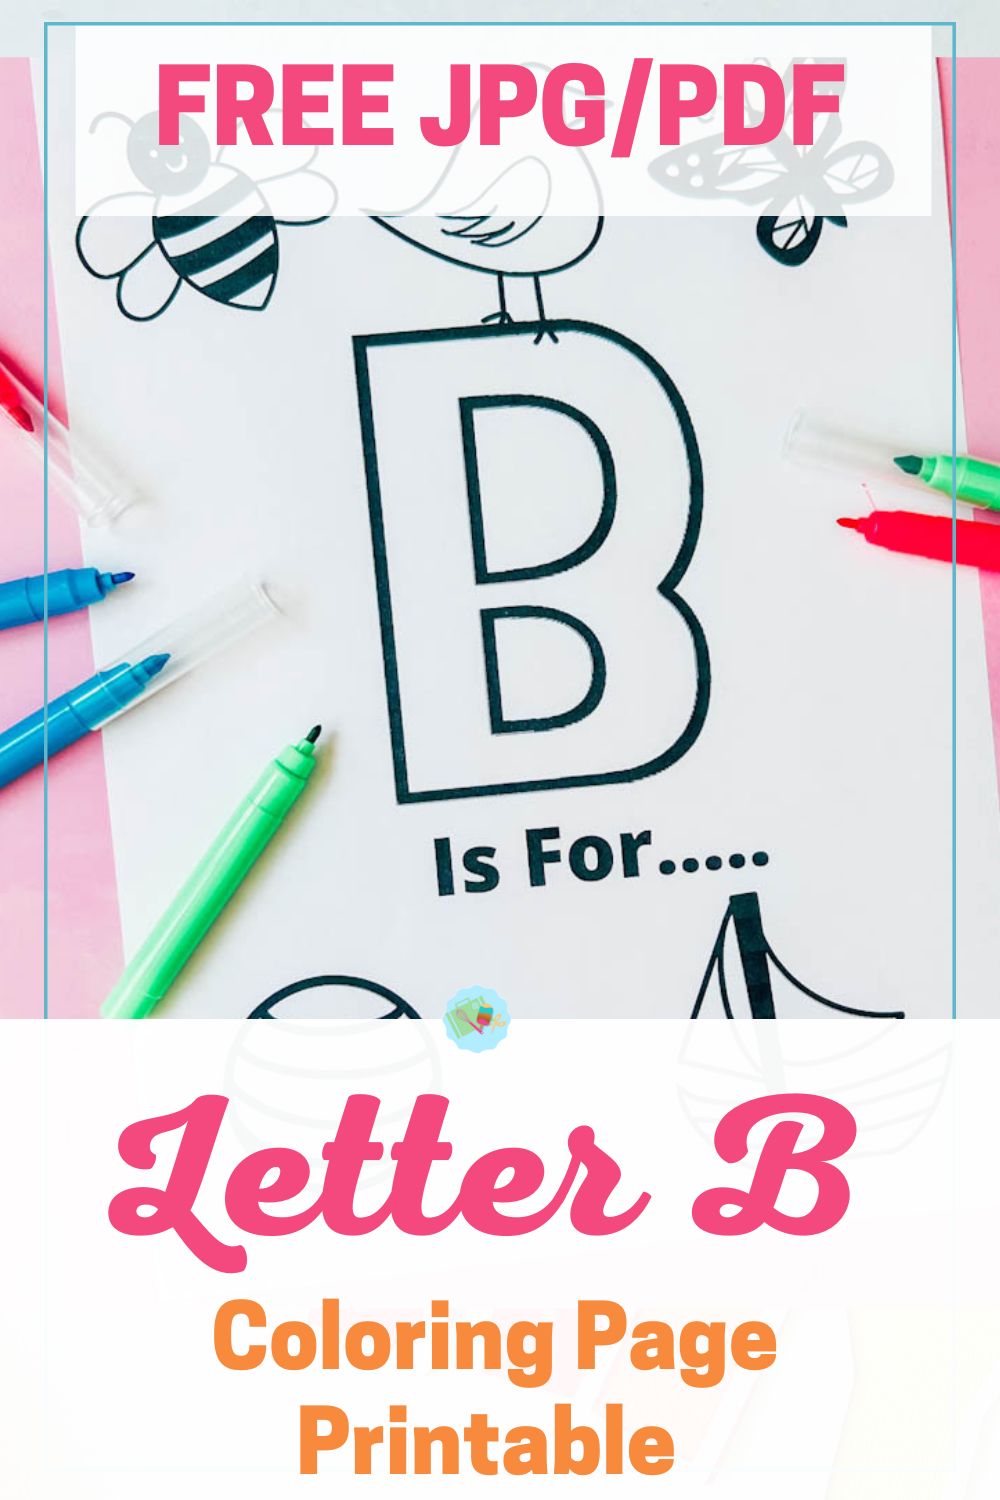 Free printable letter B Coloring page